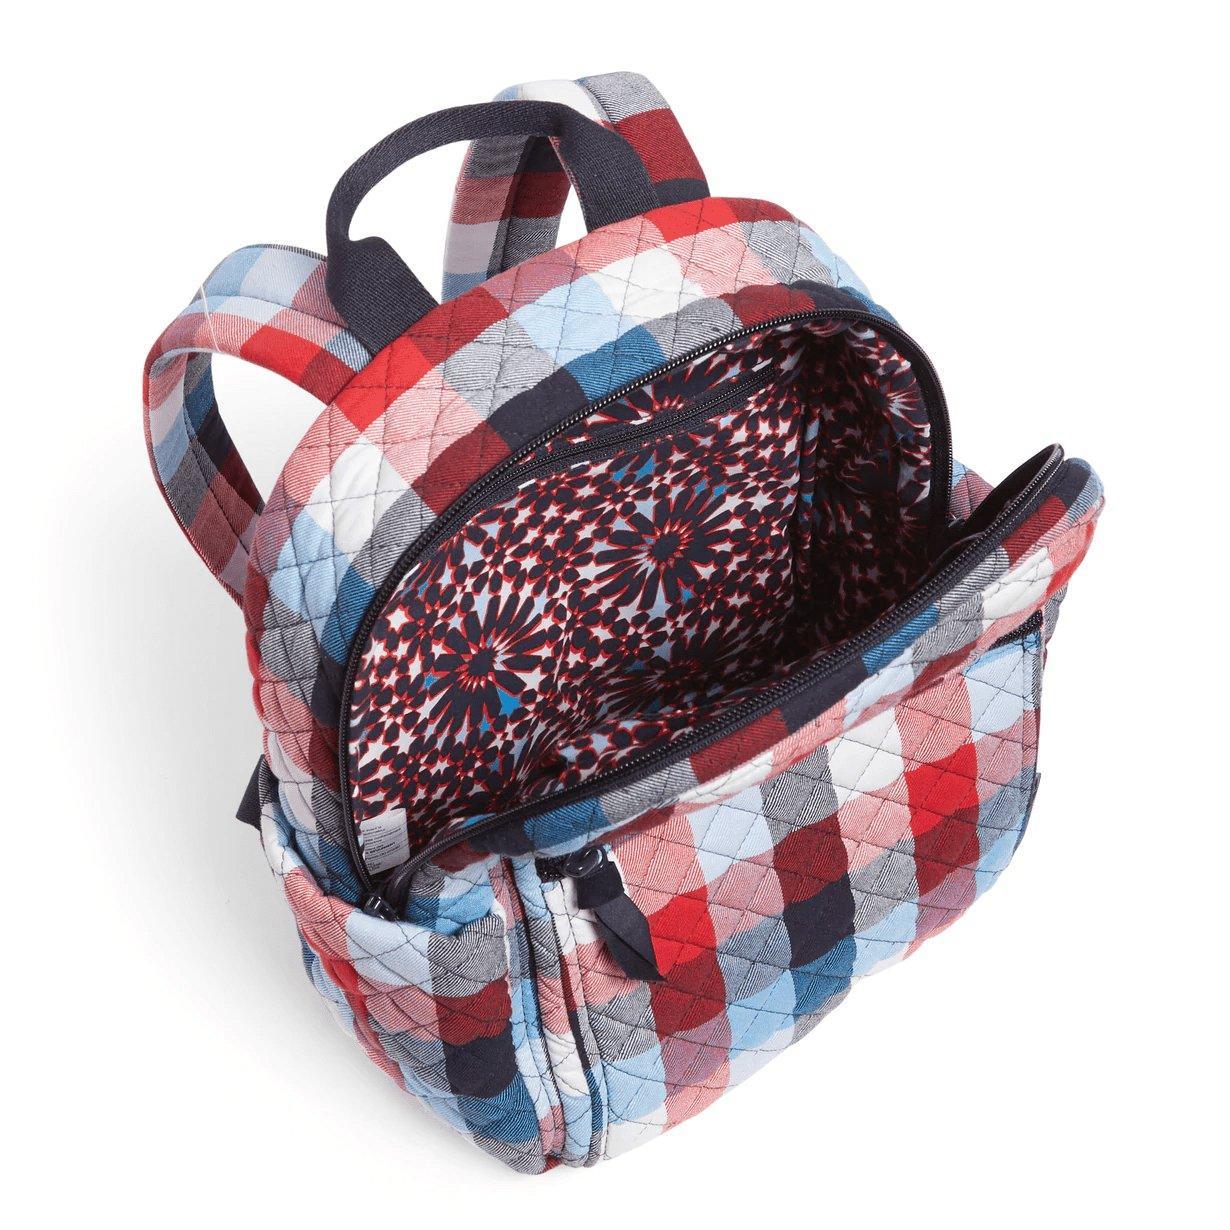 Small Backpack Patriotic Plaid - Sunshine and Grace Gifts